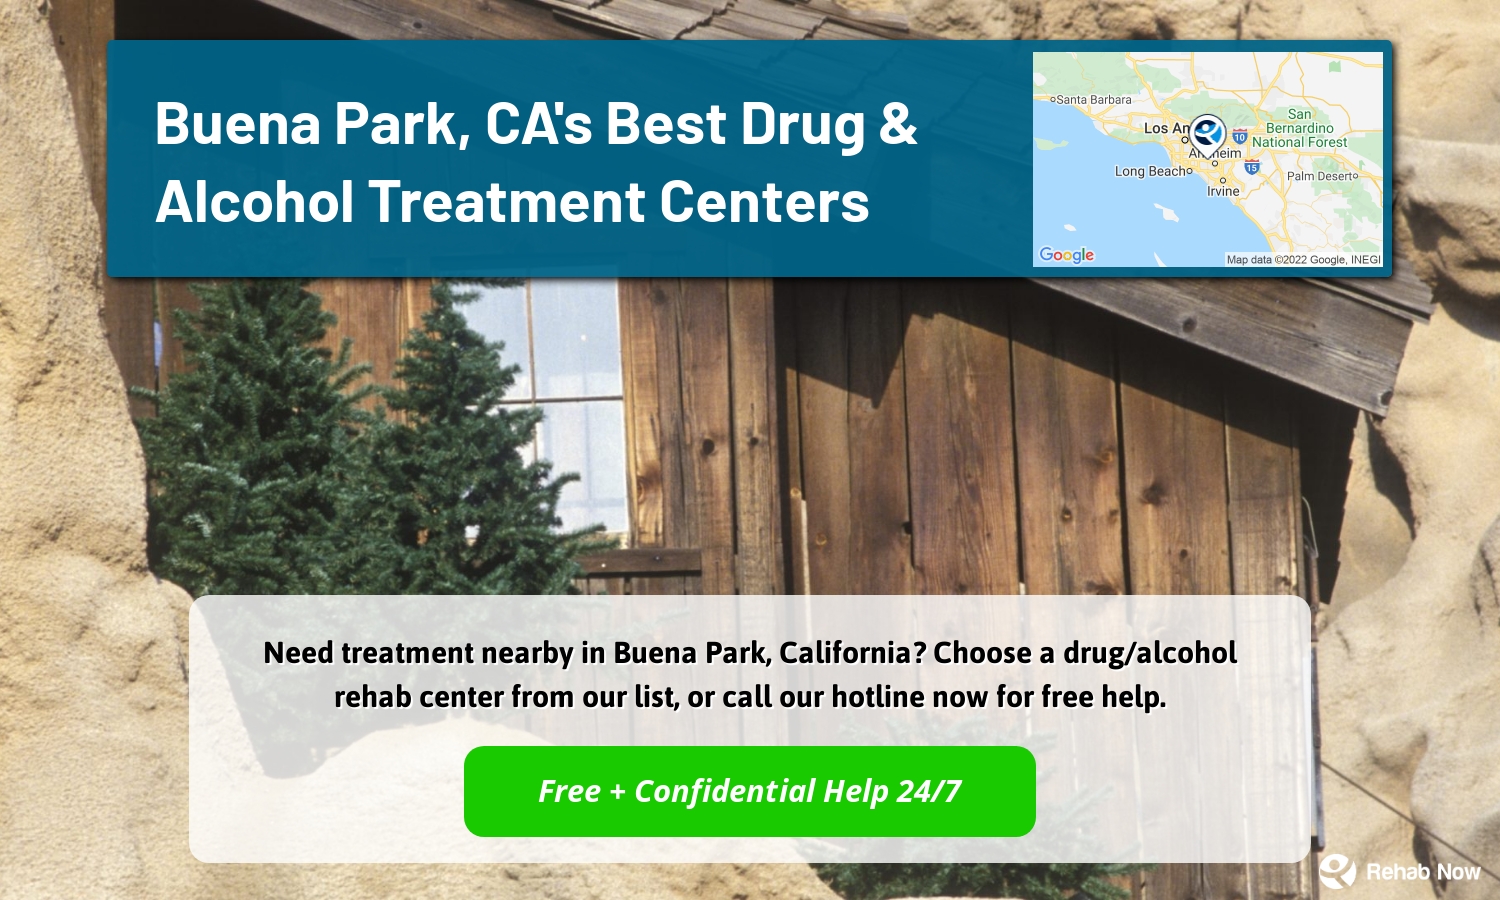 Need treatment nearby in Buena Park, California? Choose a drug/alcohol rehab center from our list, or call our hotline now for free help.